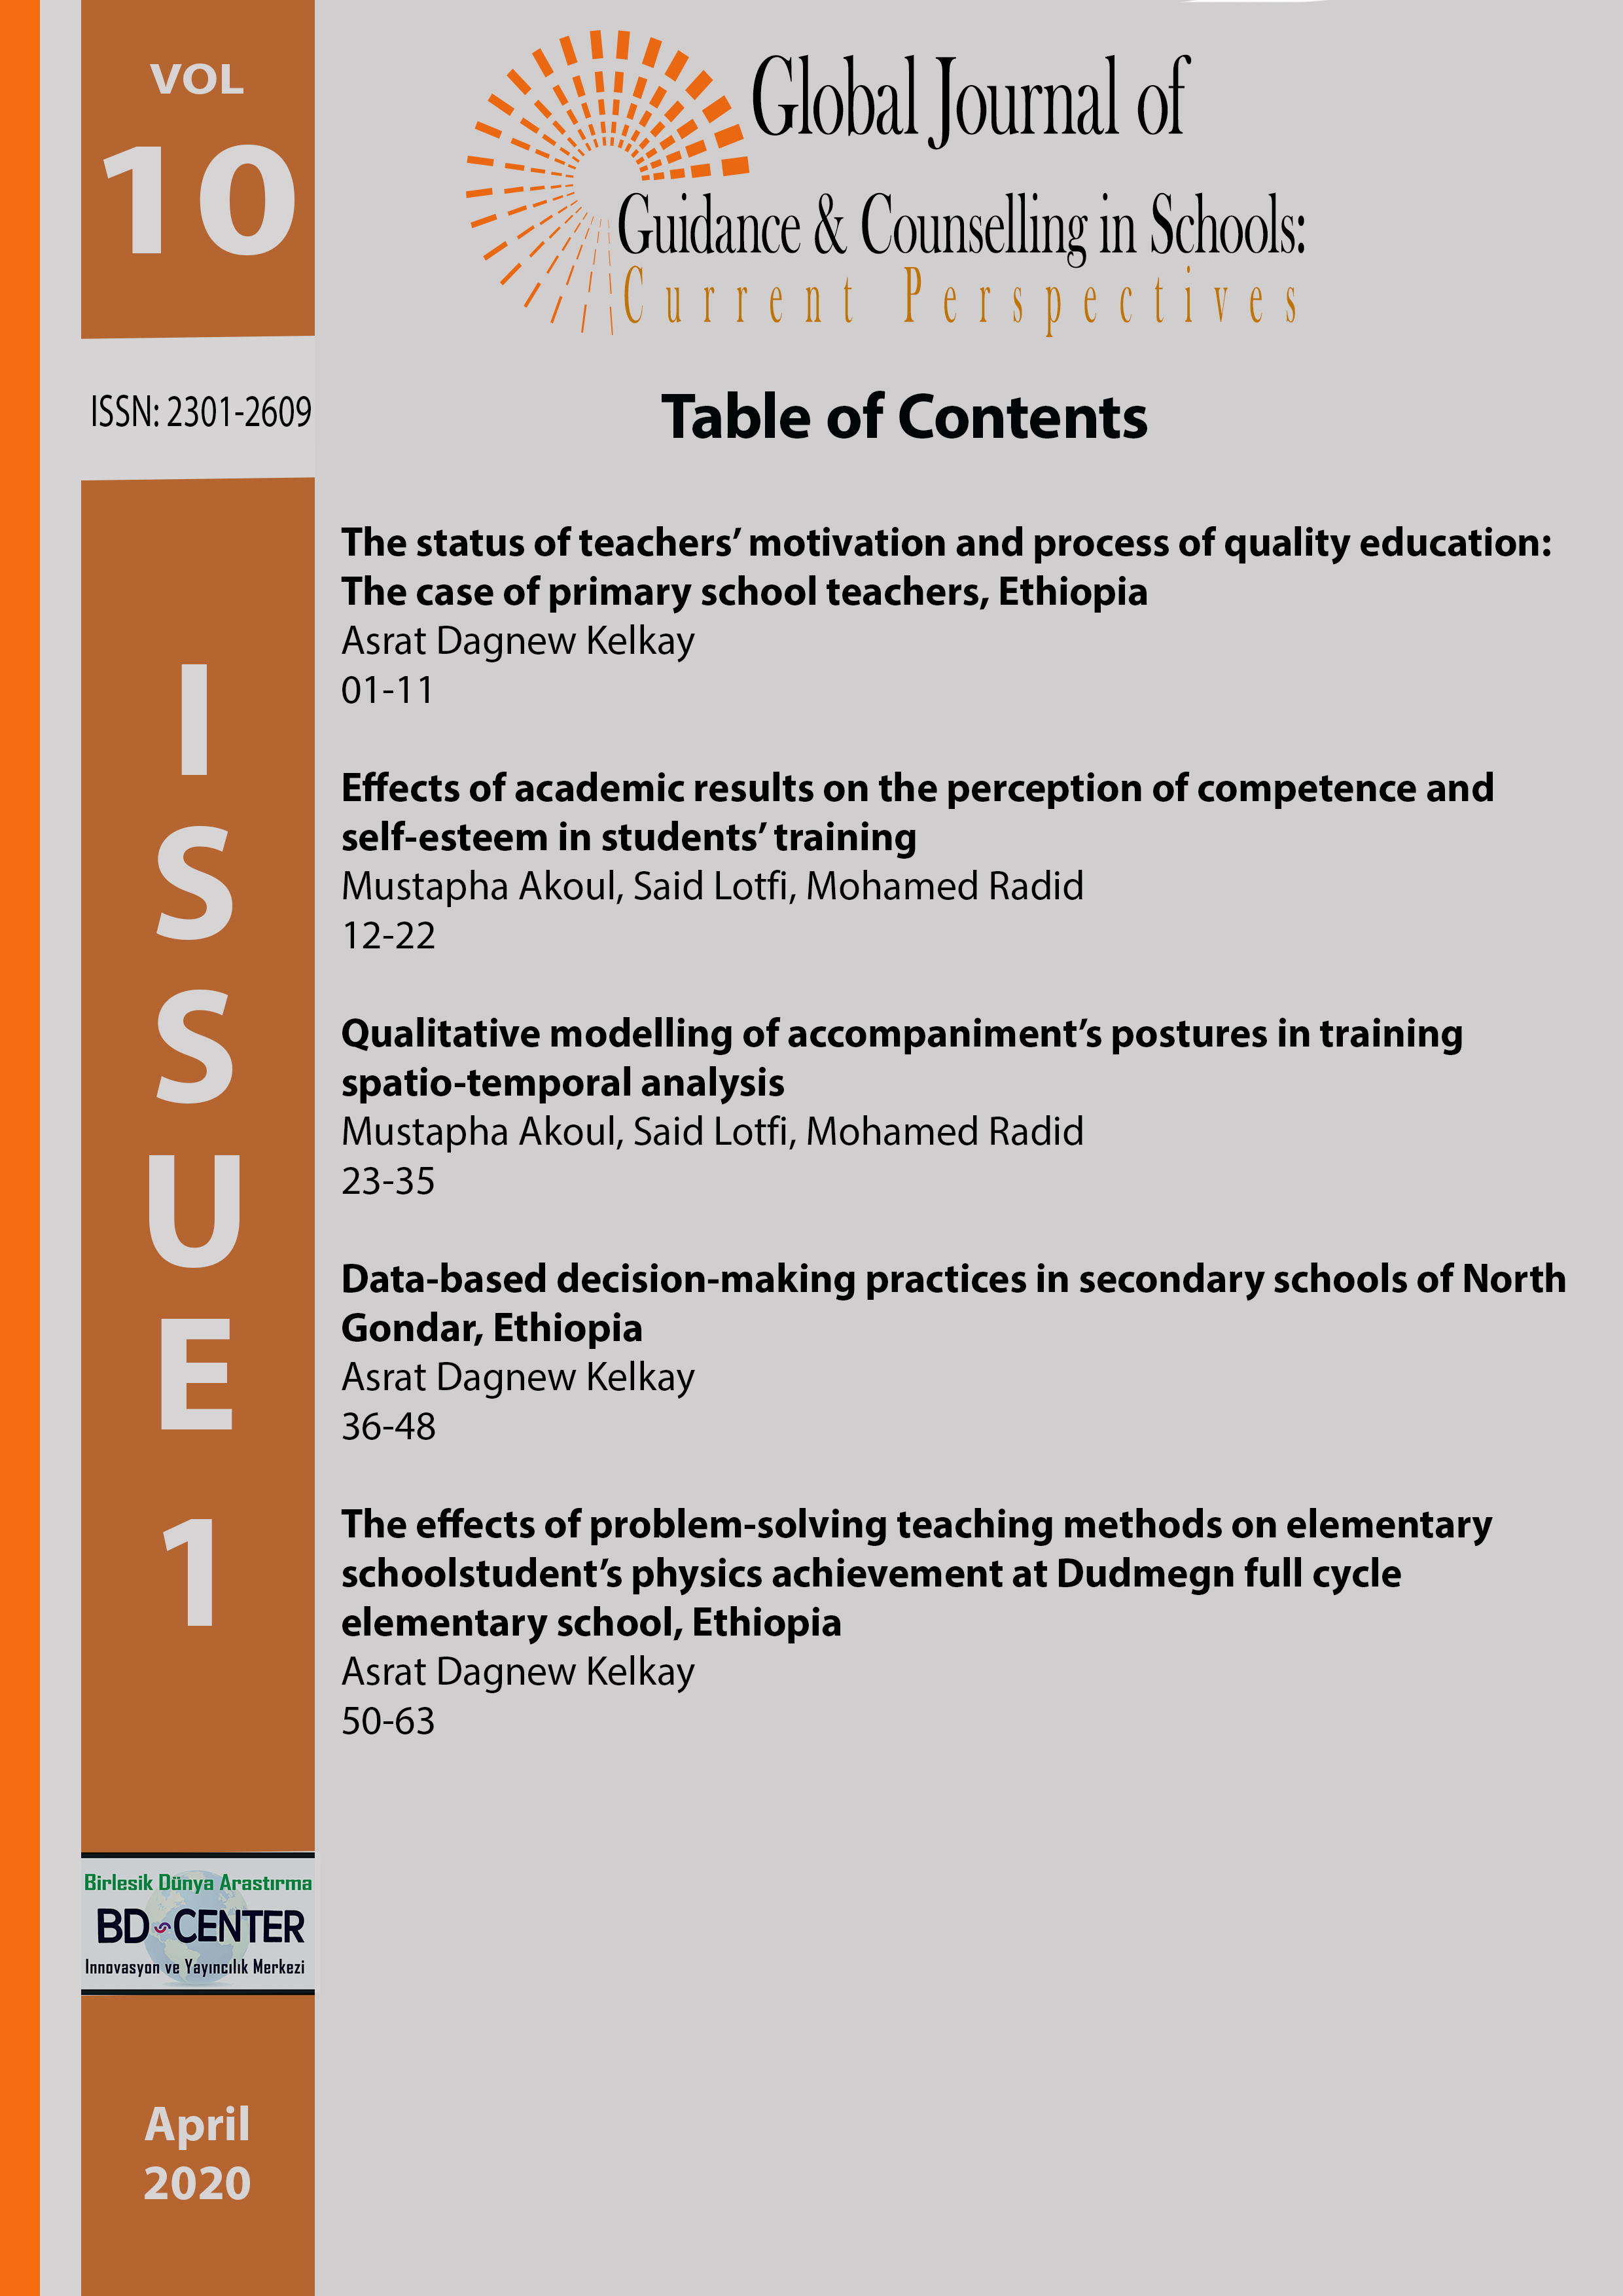 Global Journal of Guidance and Counseling in Schools: Current Perspectives-Asos İndeks